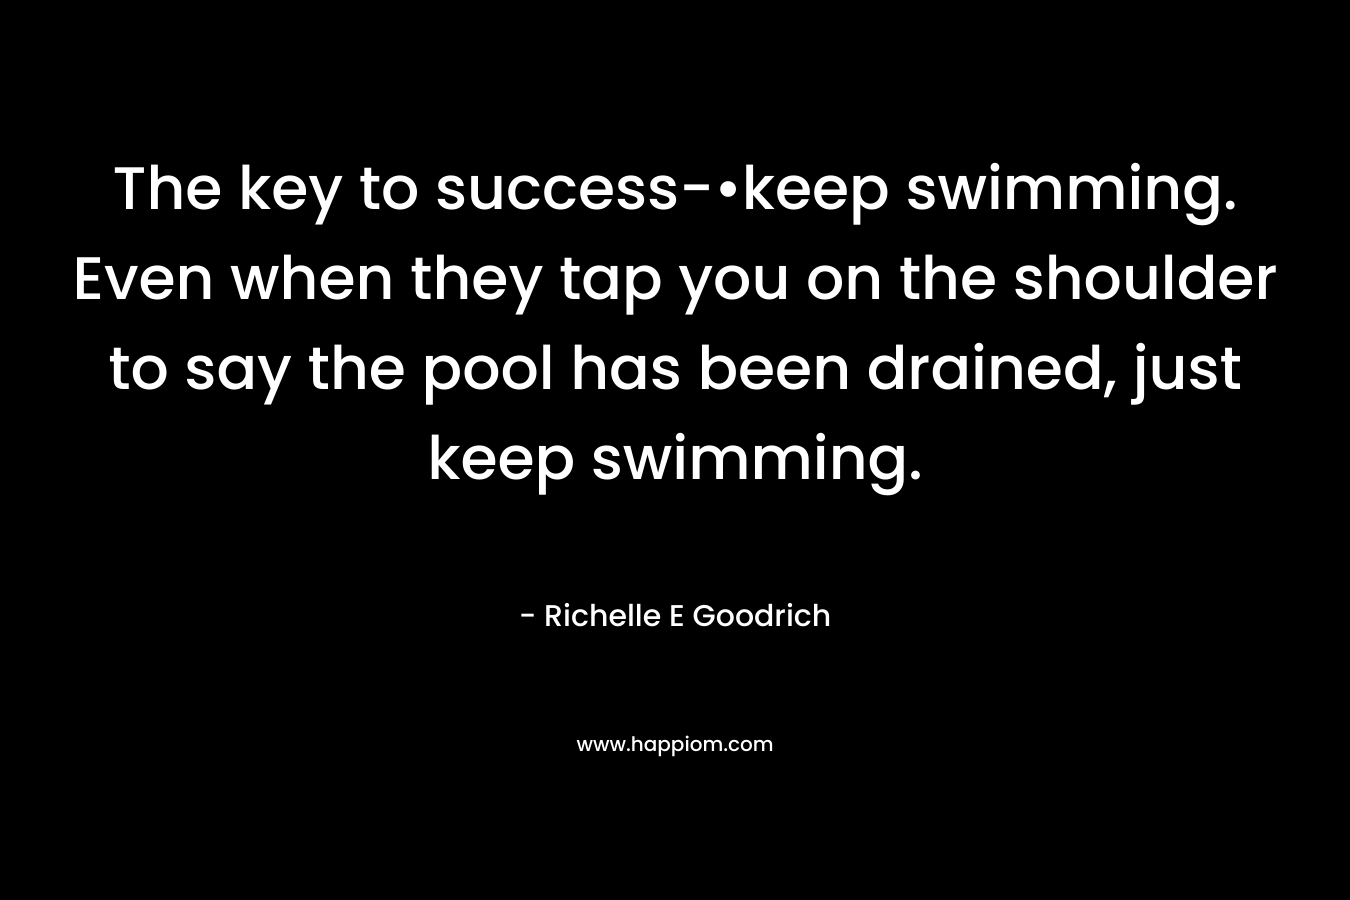 The key to success-•keep swimming. Even when they tap you on the shoulder to say the pool has been drained, just keep swimming.